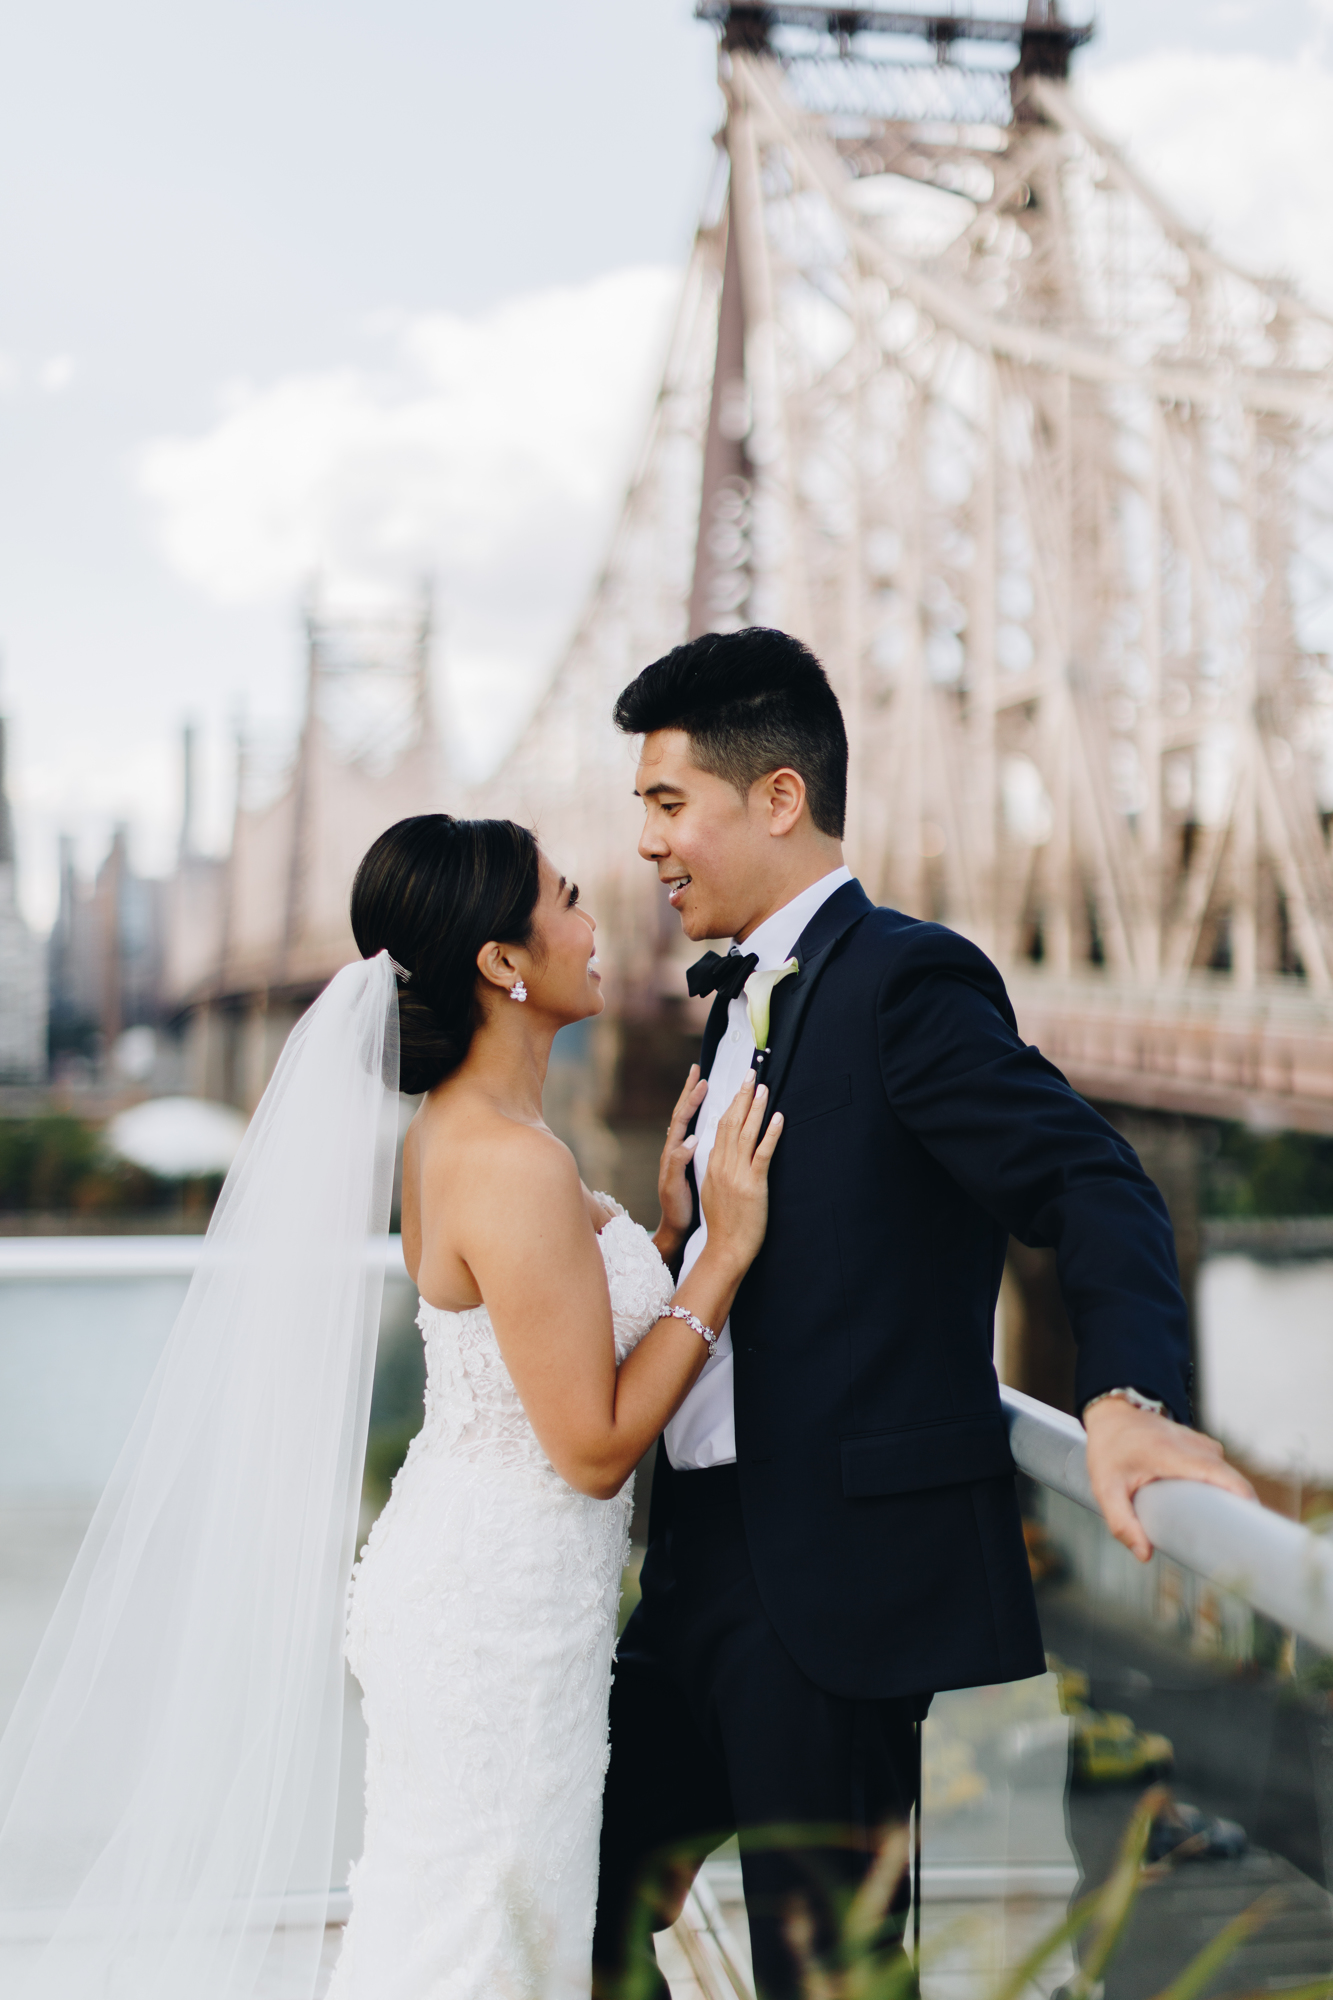 Romantic wedding photos on the roof of Ravel Hotel in New York